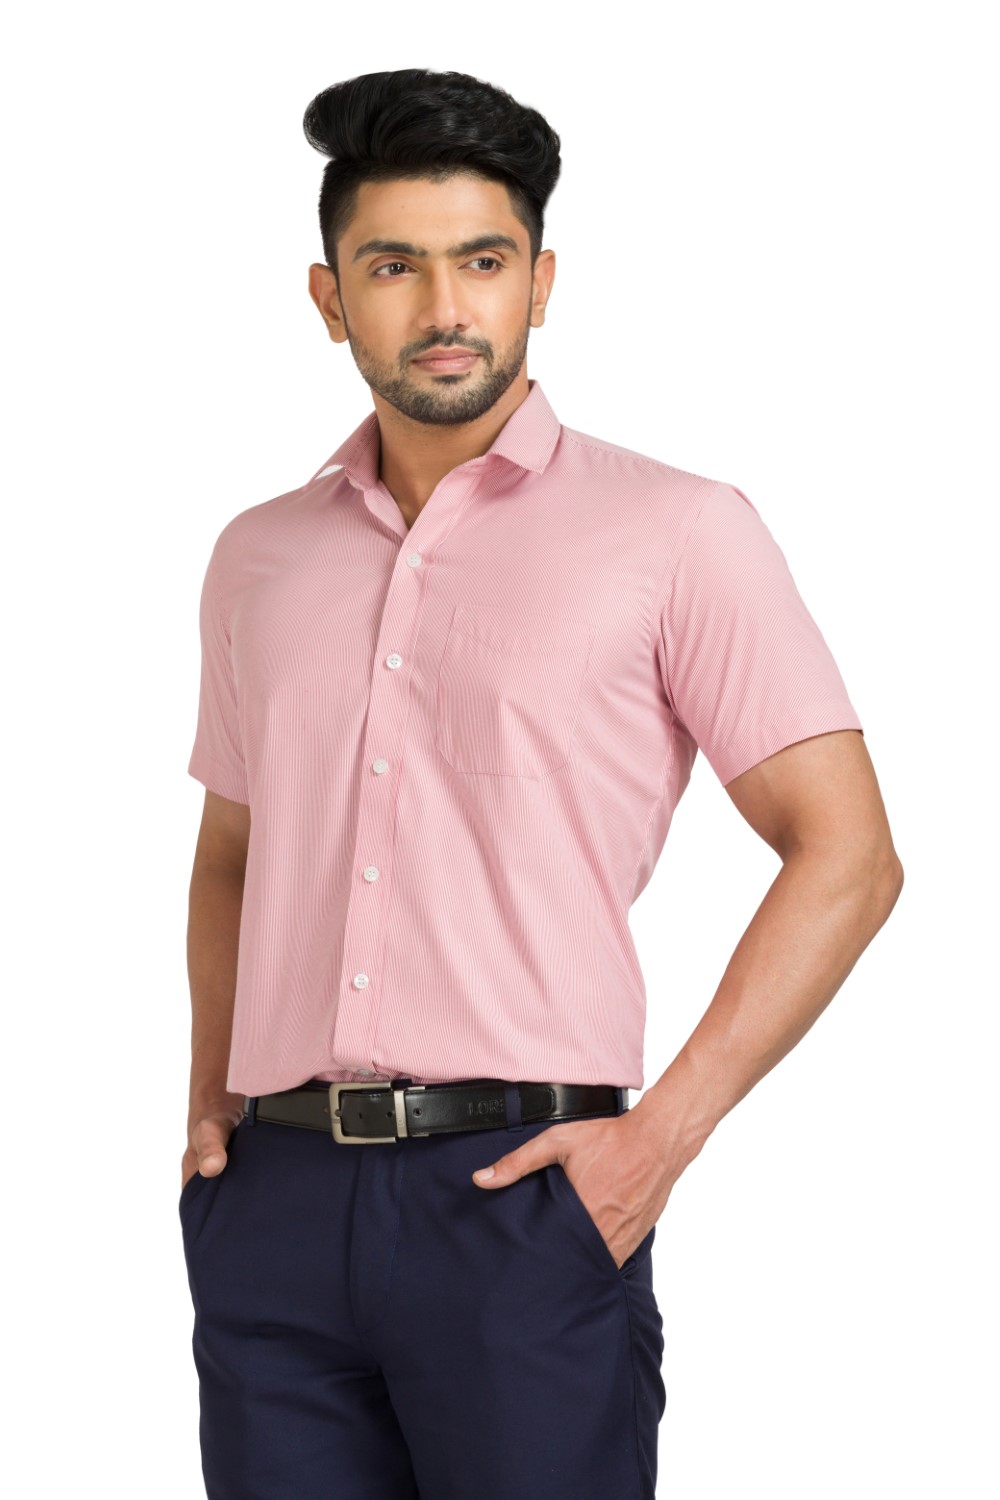 Cotton Blend Red Striped Half Shirt With A Regular fit and Easy Maintenance